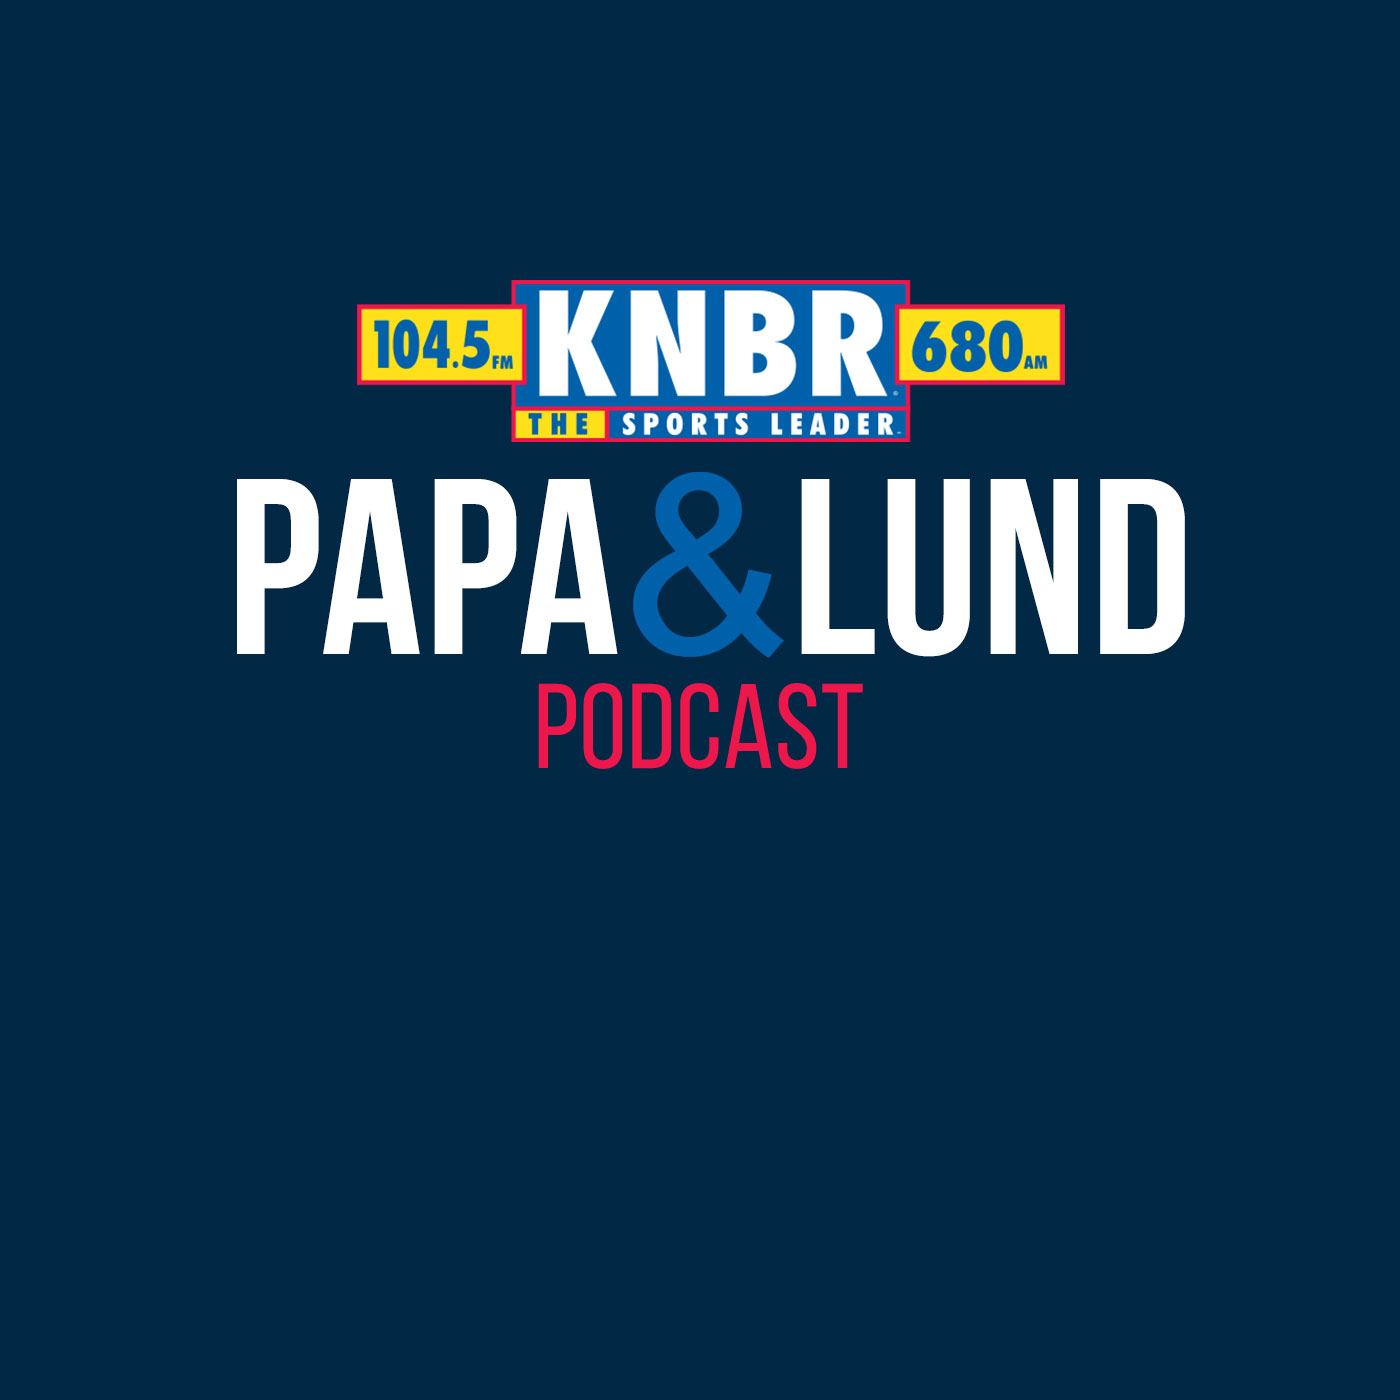 3-8 Brandon Payne joins Papa & Lund to discuss the latest on Steph Curry's ankle injury and what he will need to do to return to the court sooner rather than later